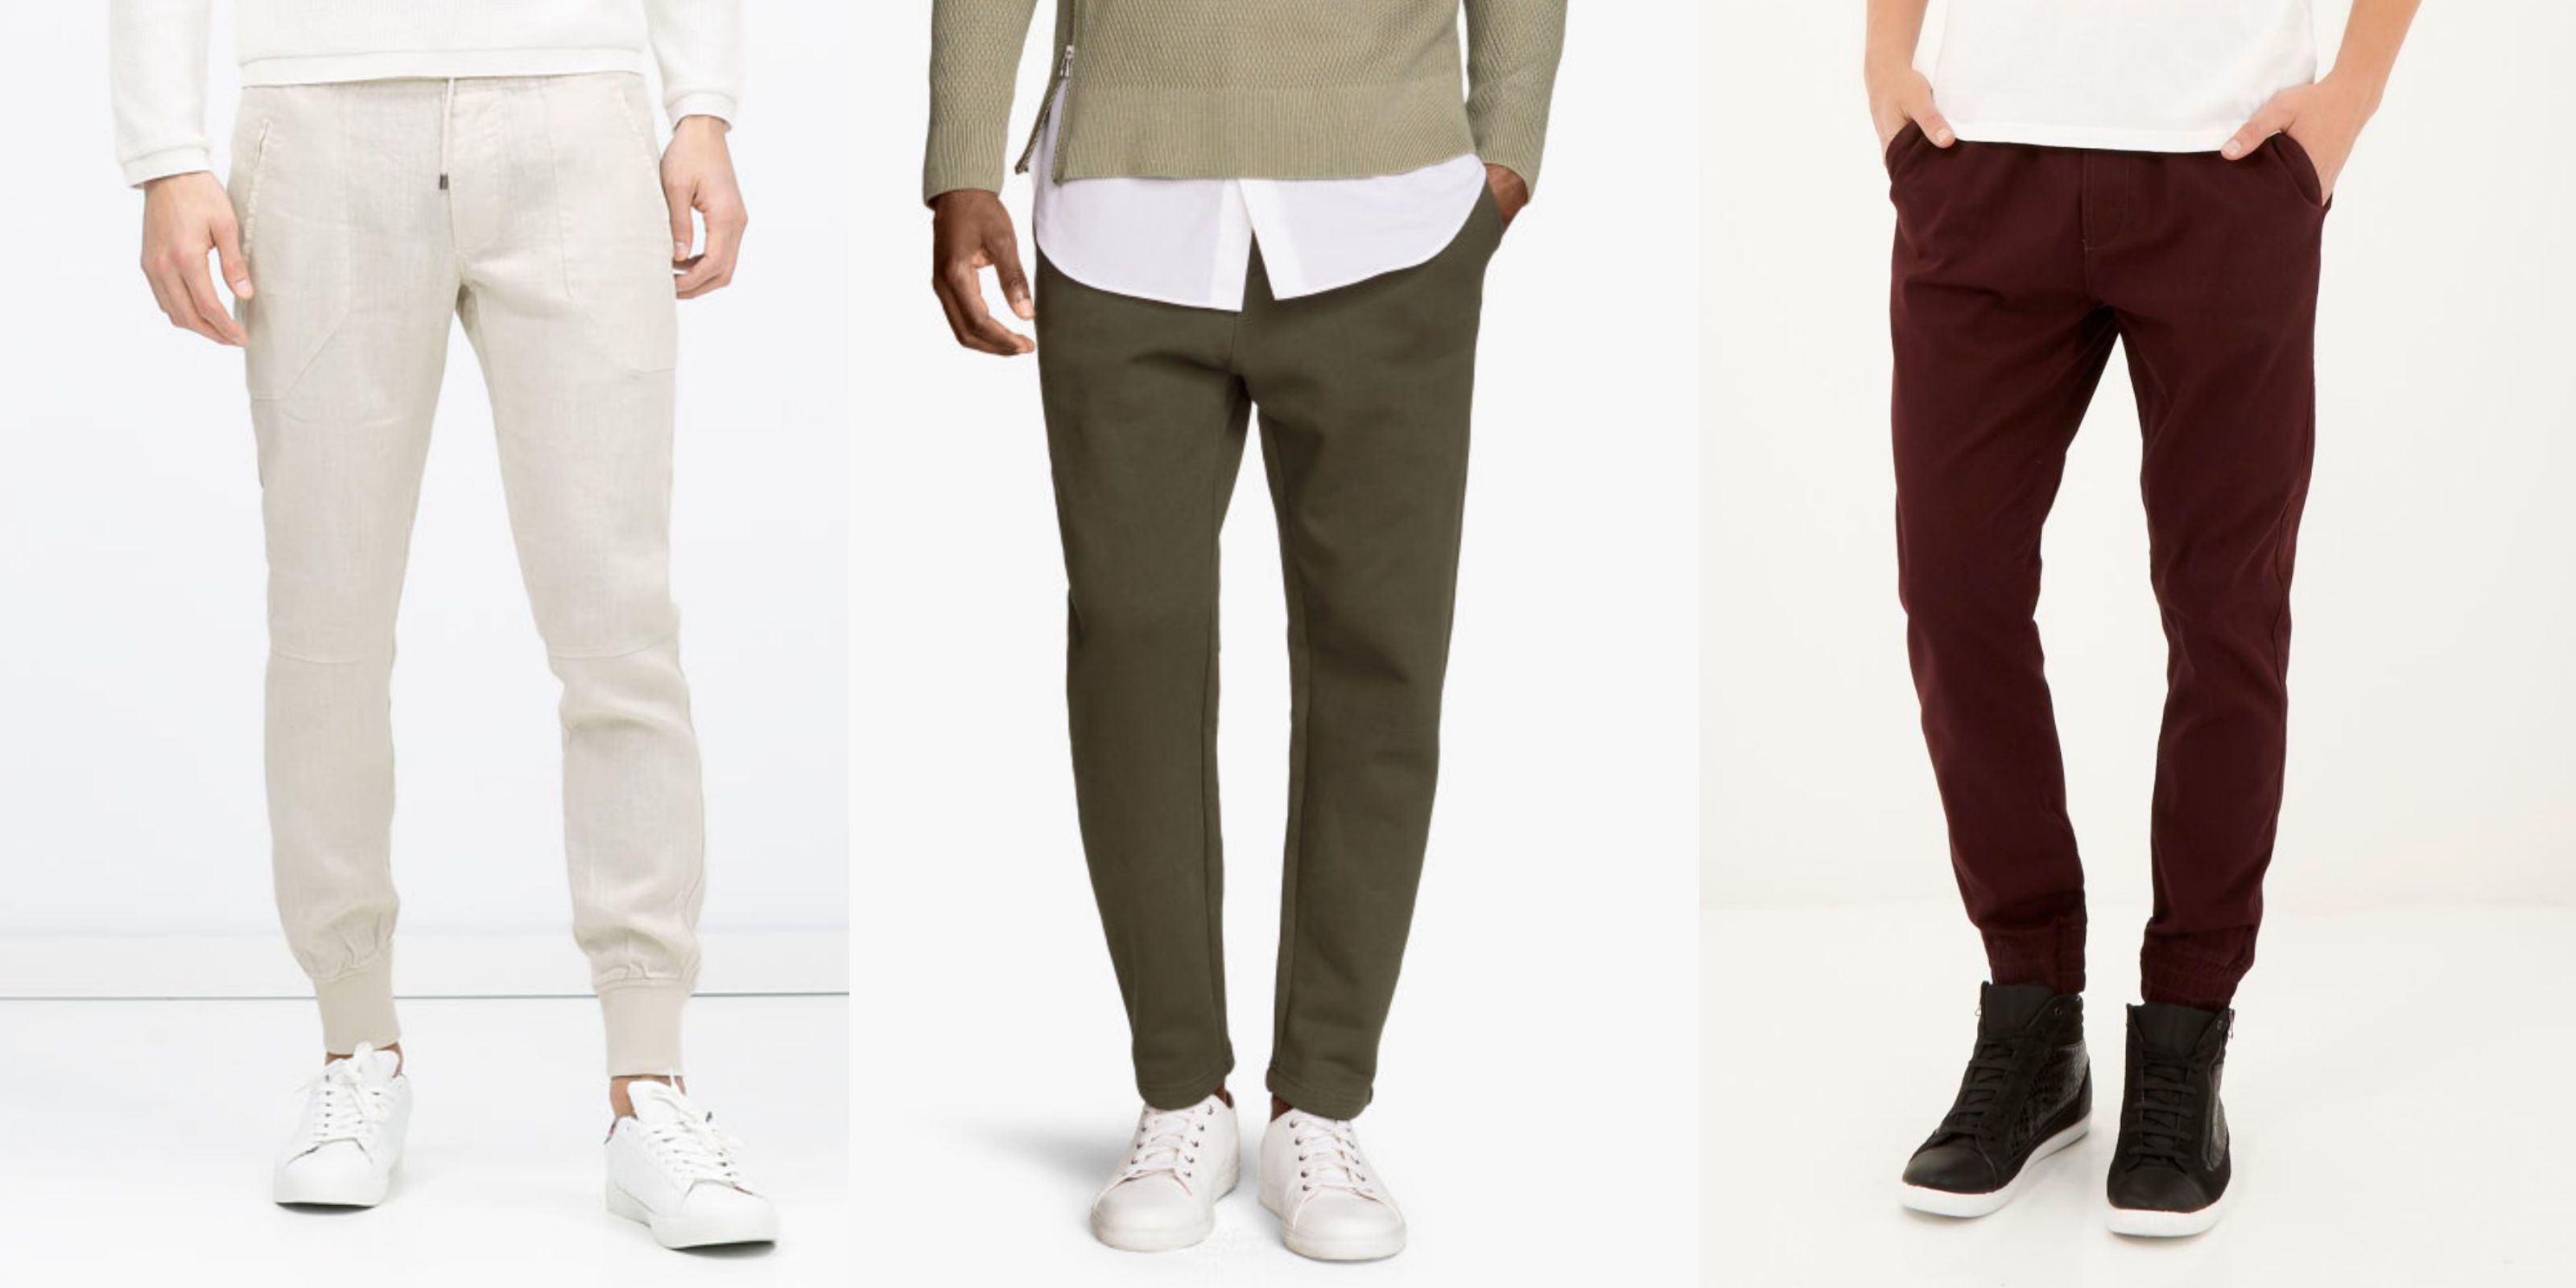 10 Tailored Jogging Pants Under $100